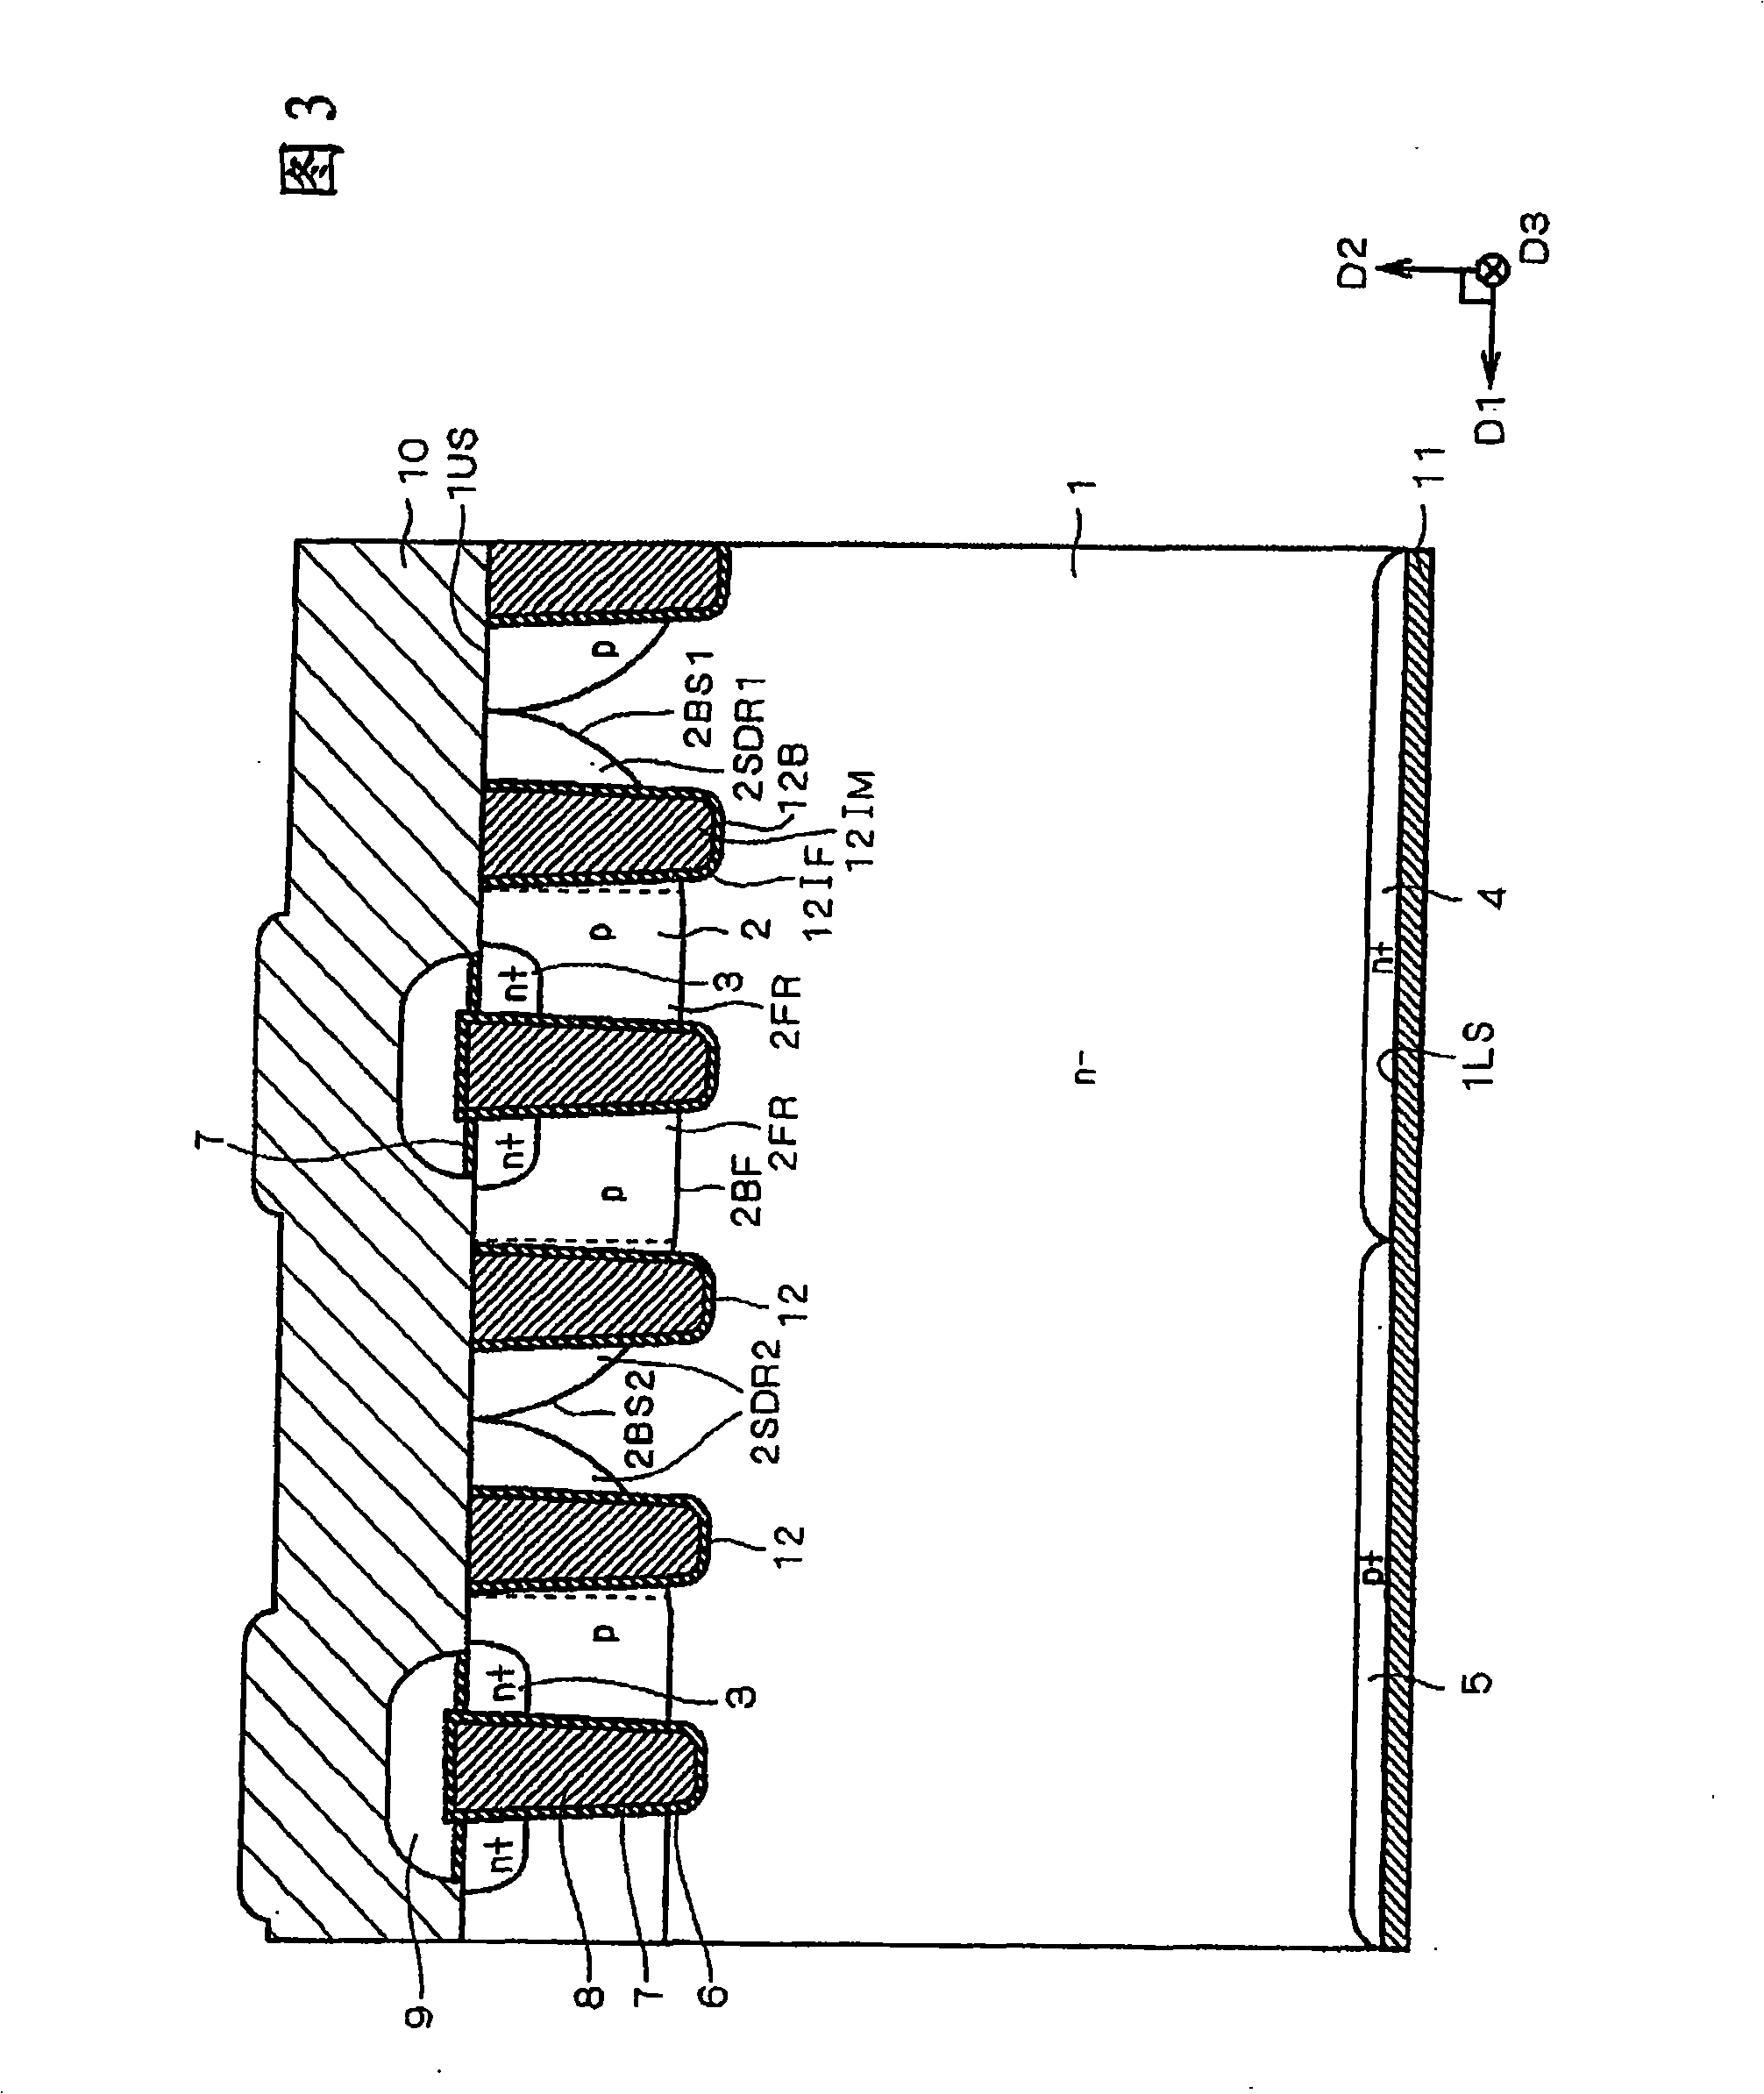 Insulated gate transistor incorporating diode and inverter circuit